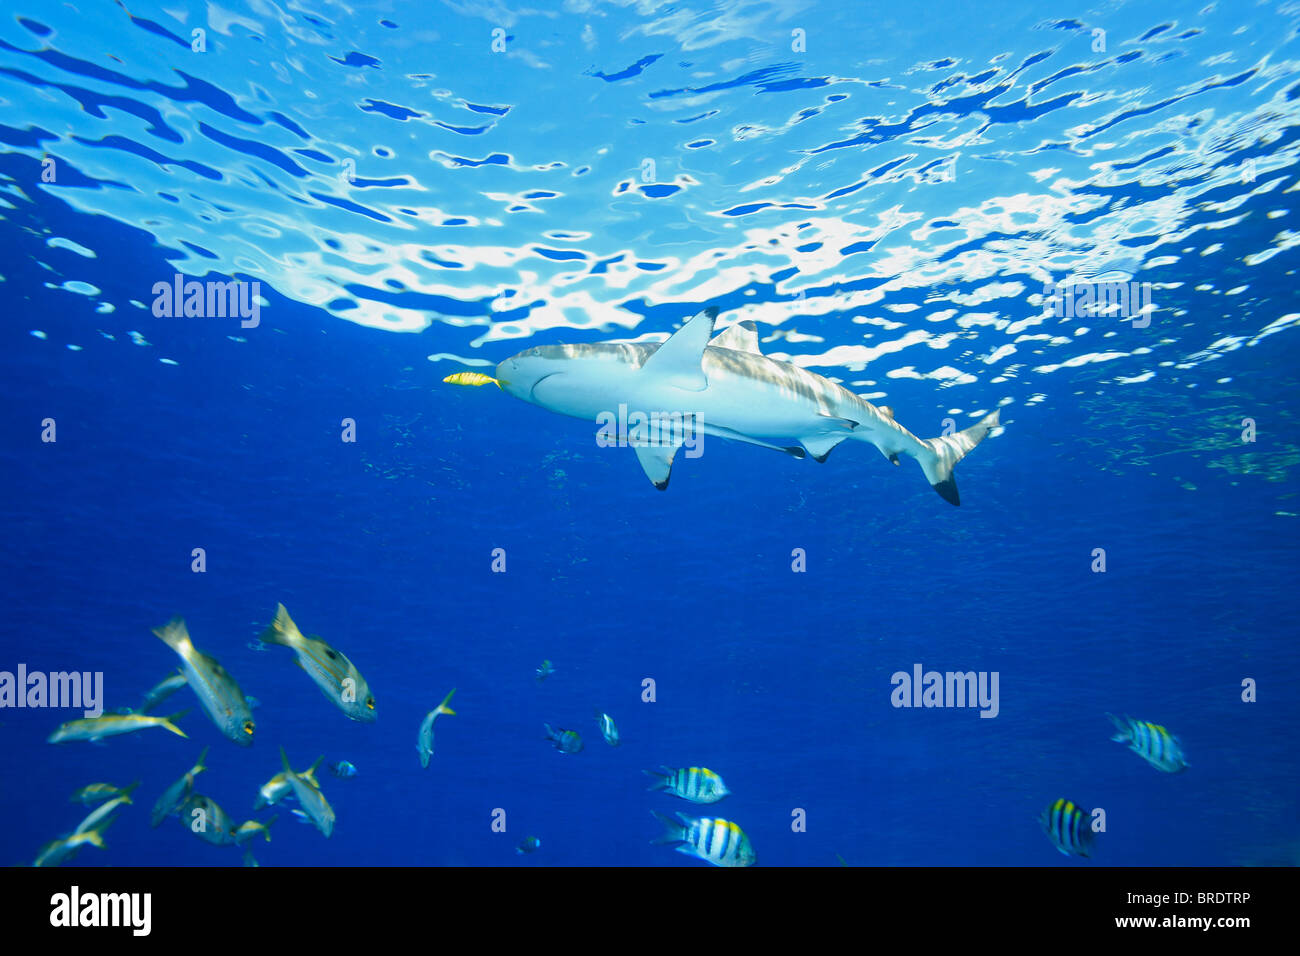 A Blacktip Reef Shark swimming in shallow water with a yellow pilot fish and two slender suckerfish, or remoras, on its belly. Stock Photo